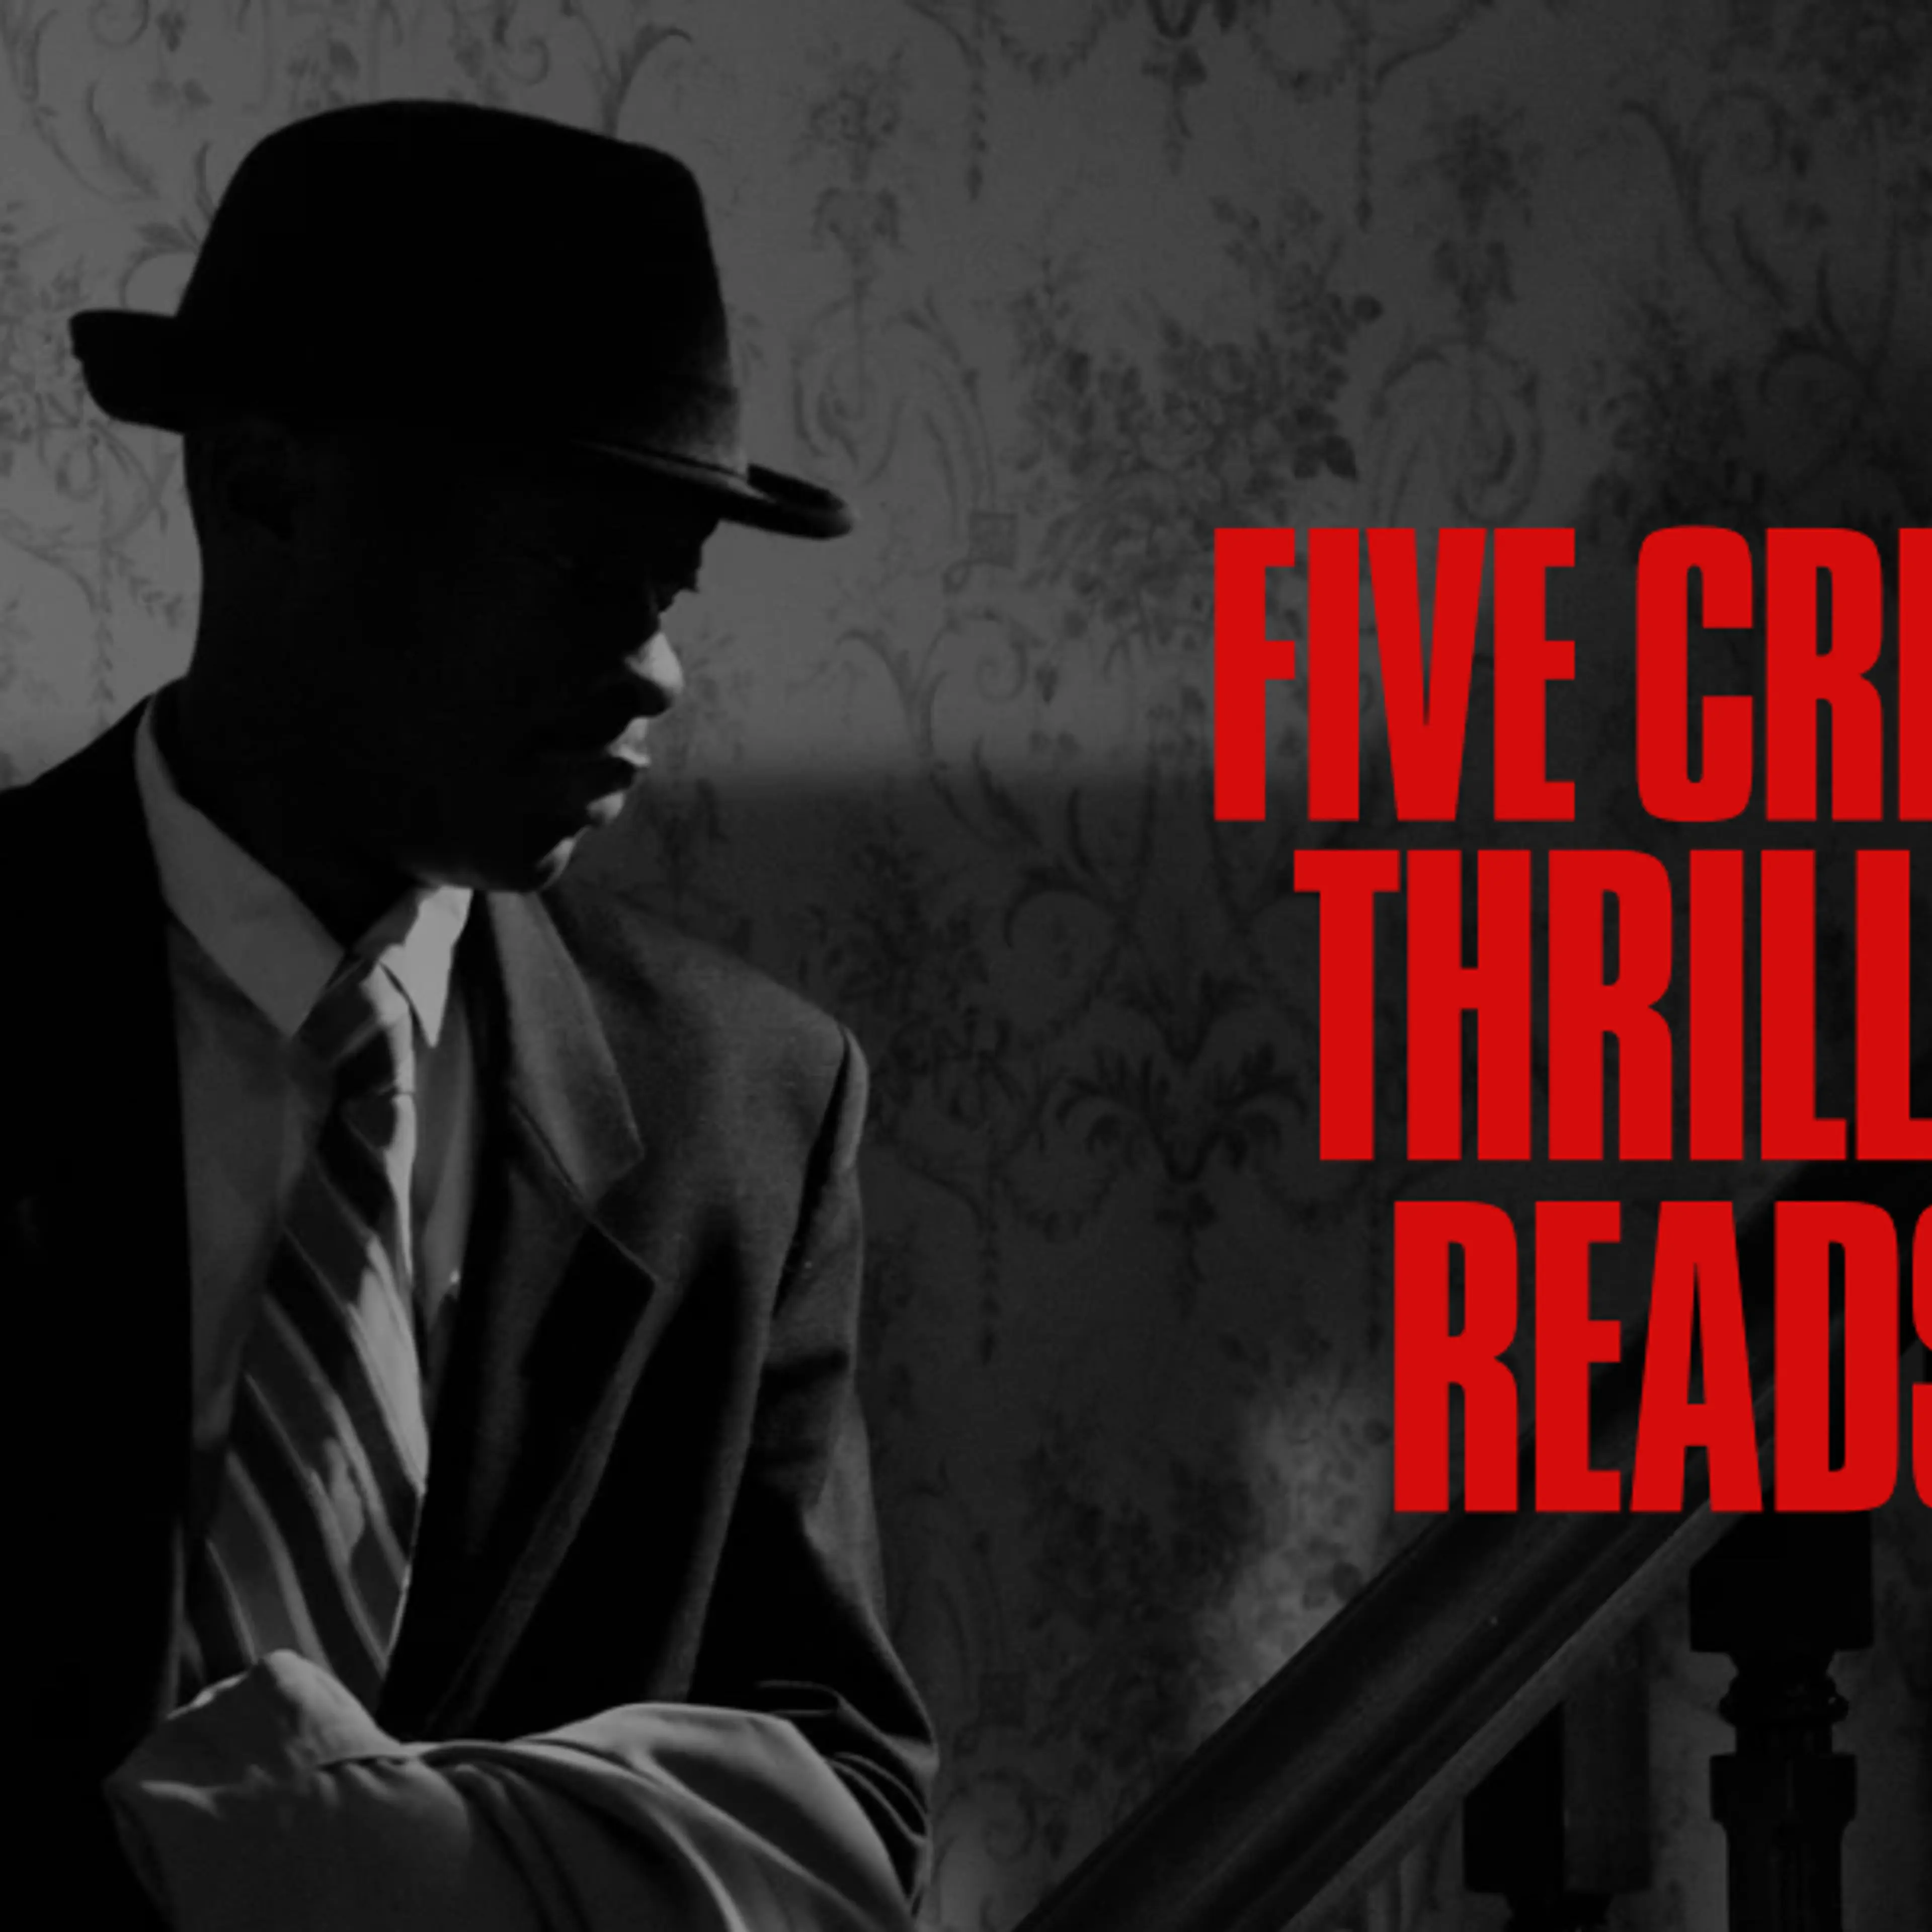 5 Crime Thriller Reads That Will Keep You On The Edge Of Your Seat